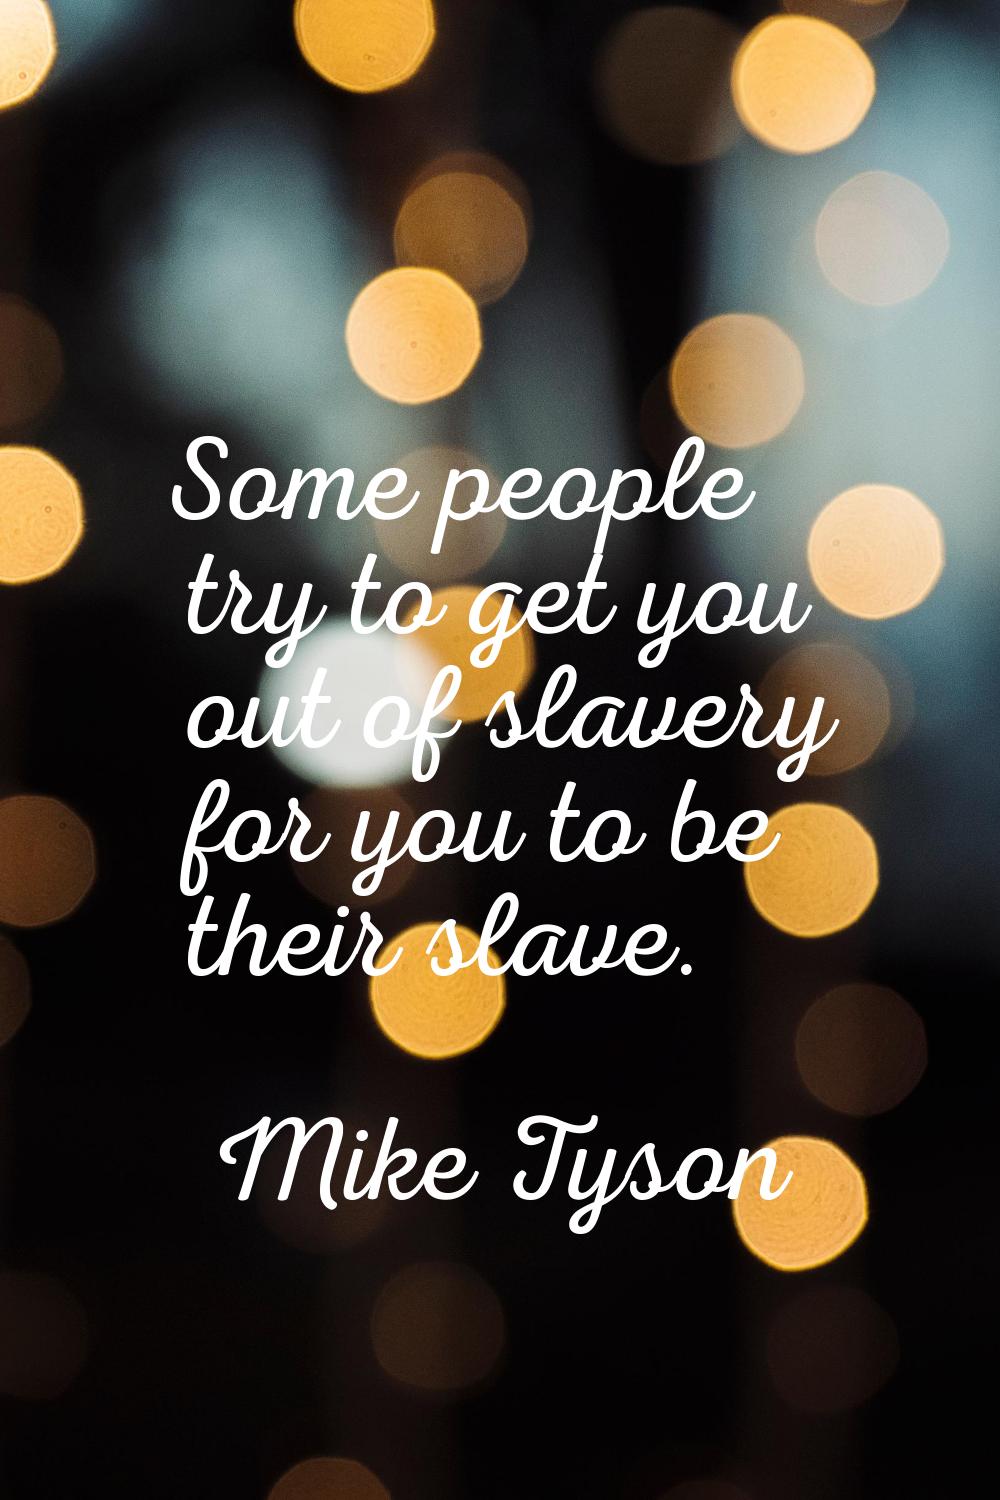 Some people try to get you out of slavery for you to be their slave.